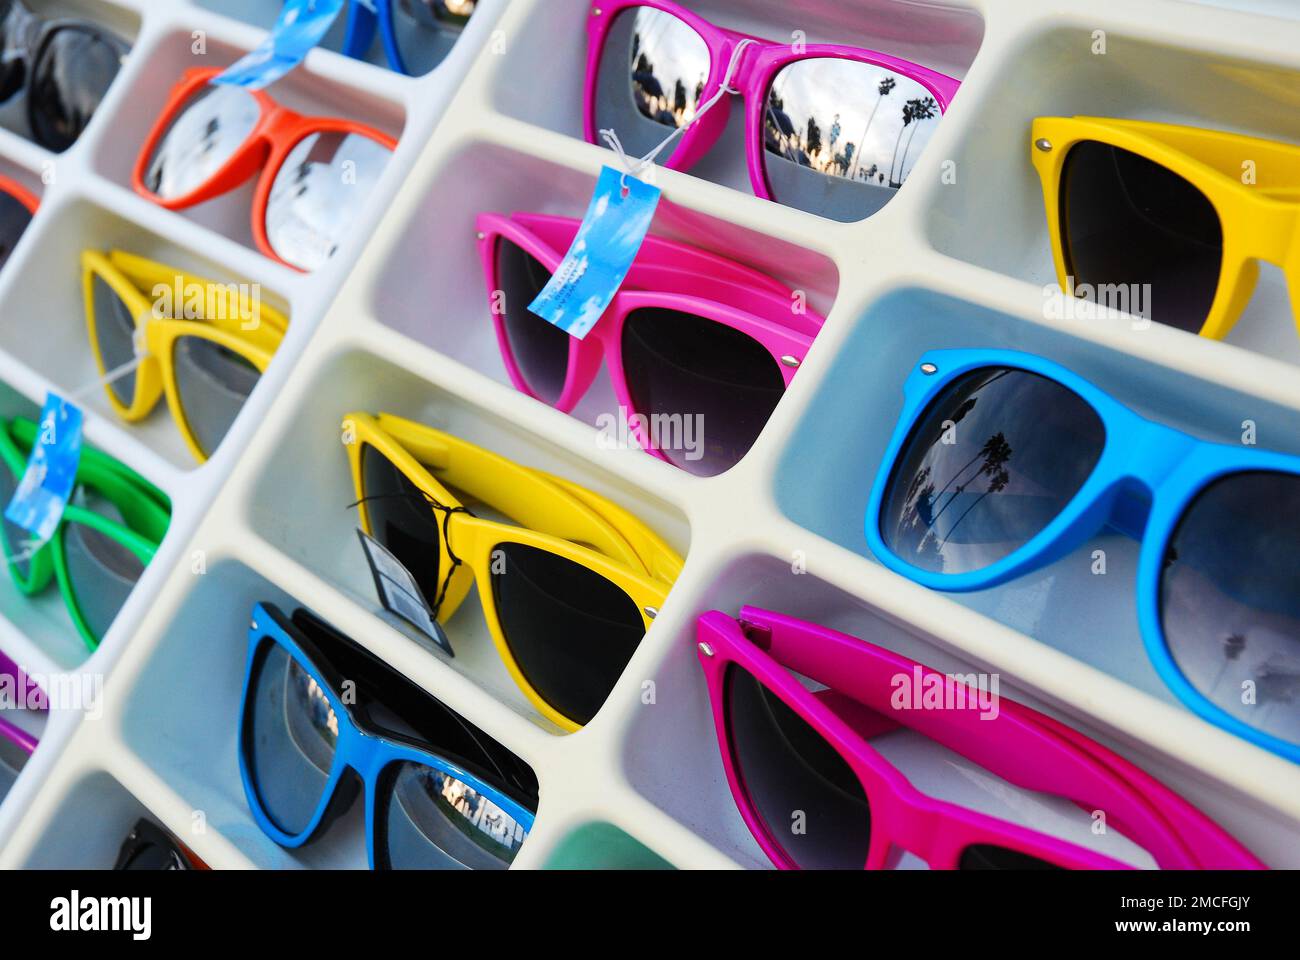 Colorful sunglasses on display at an outdoor market stall and retail store, reflecting palm trees, foreshadow a sunny day at Venice Beach, California Stock Photo